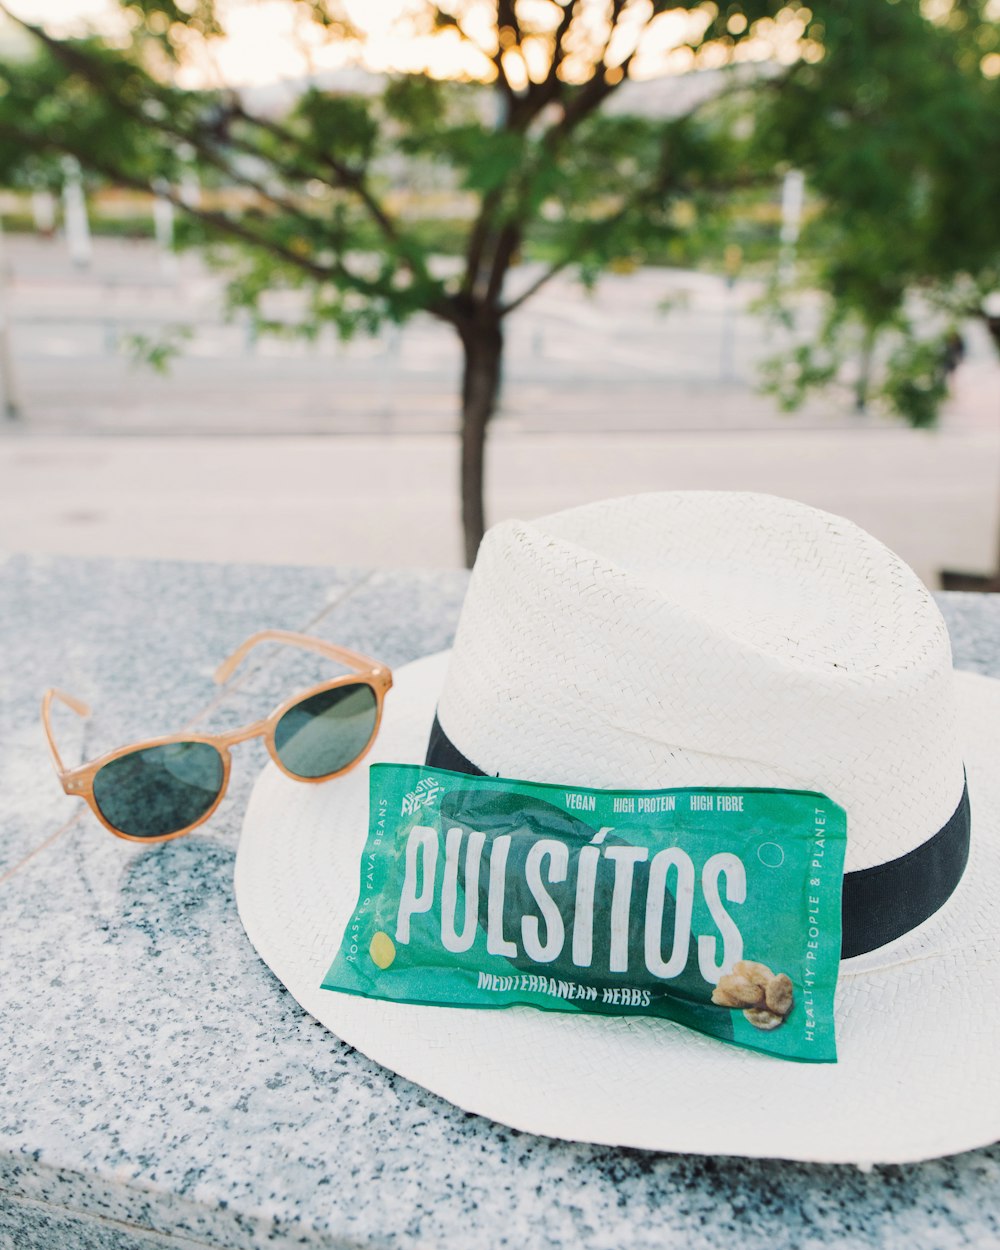 a hat, sunglasses, and a bar of pulsitos are sitting on